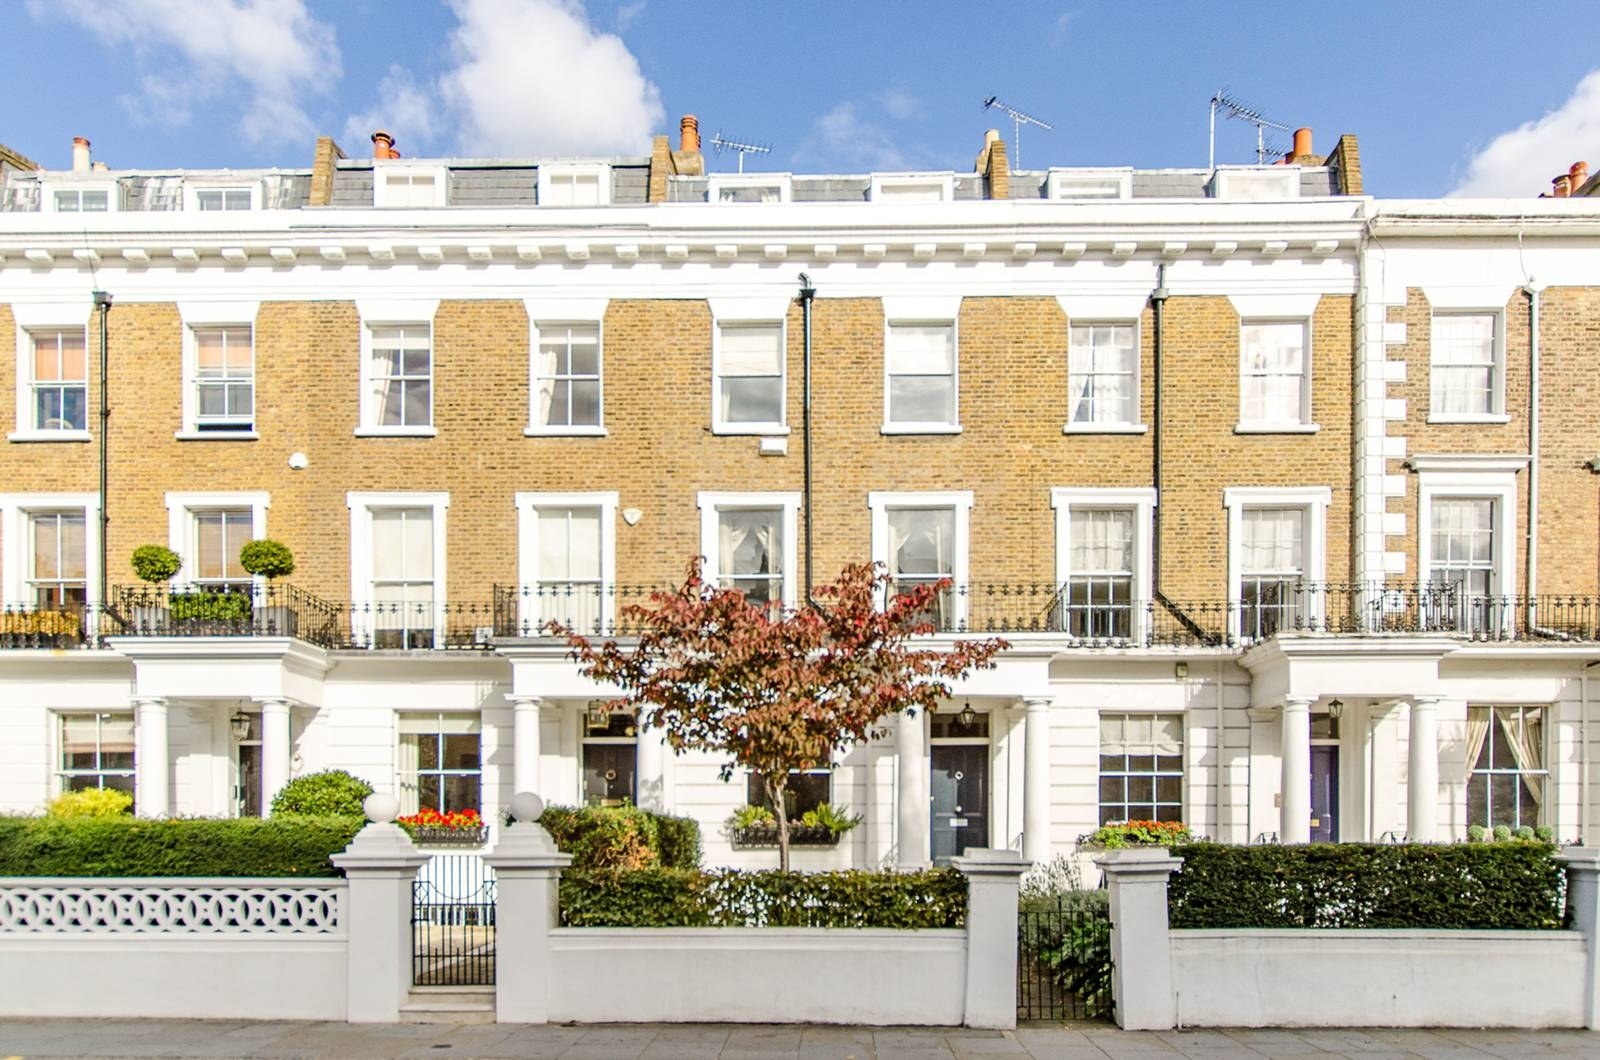 18 Dream London Properties You Can't Afford But Wanna Look At Anyway